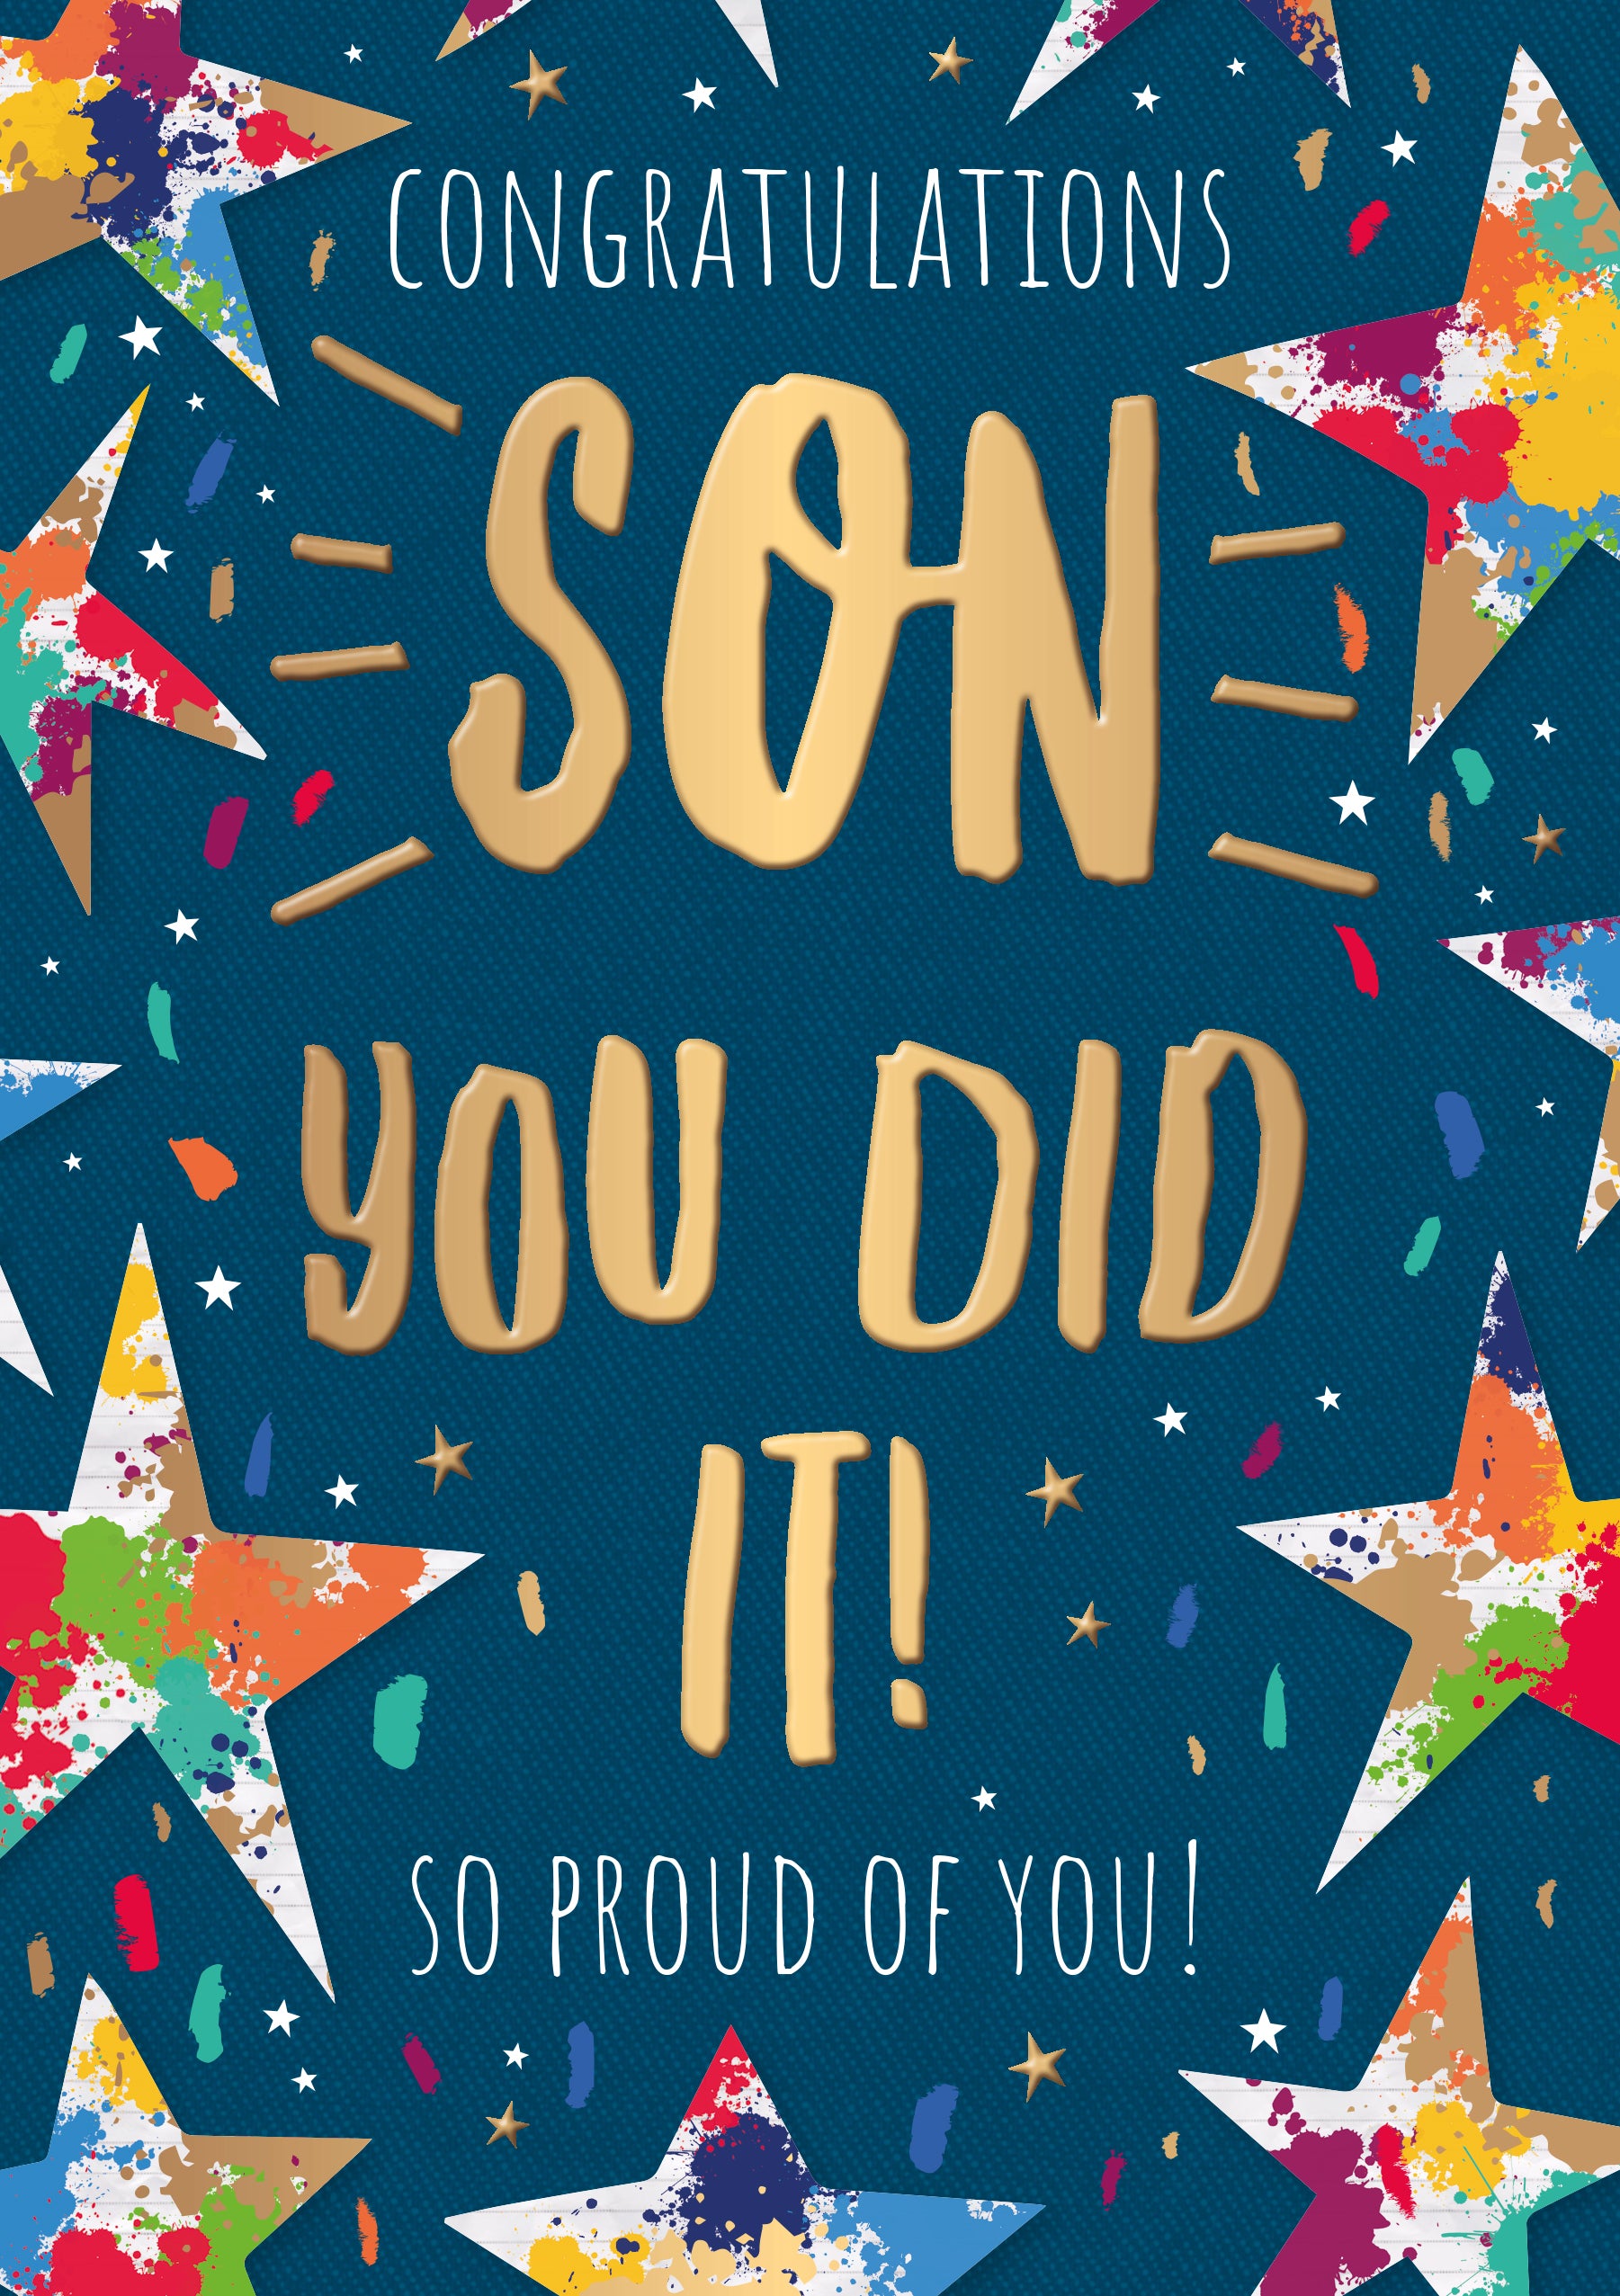 Son You Did It Stars Congratulations Card by penny black